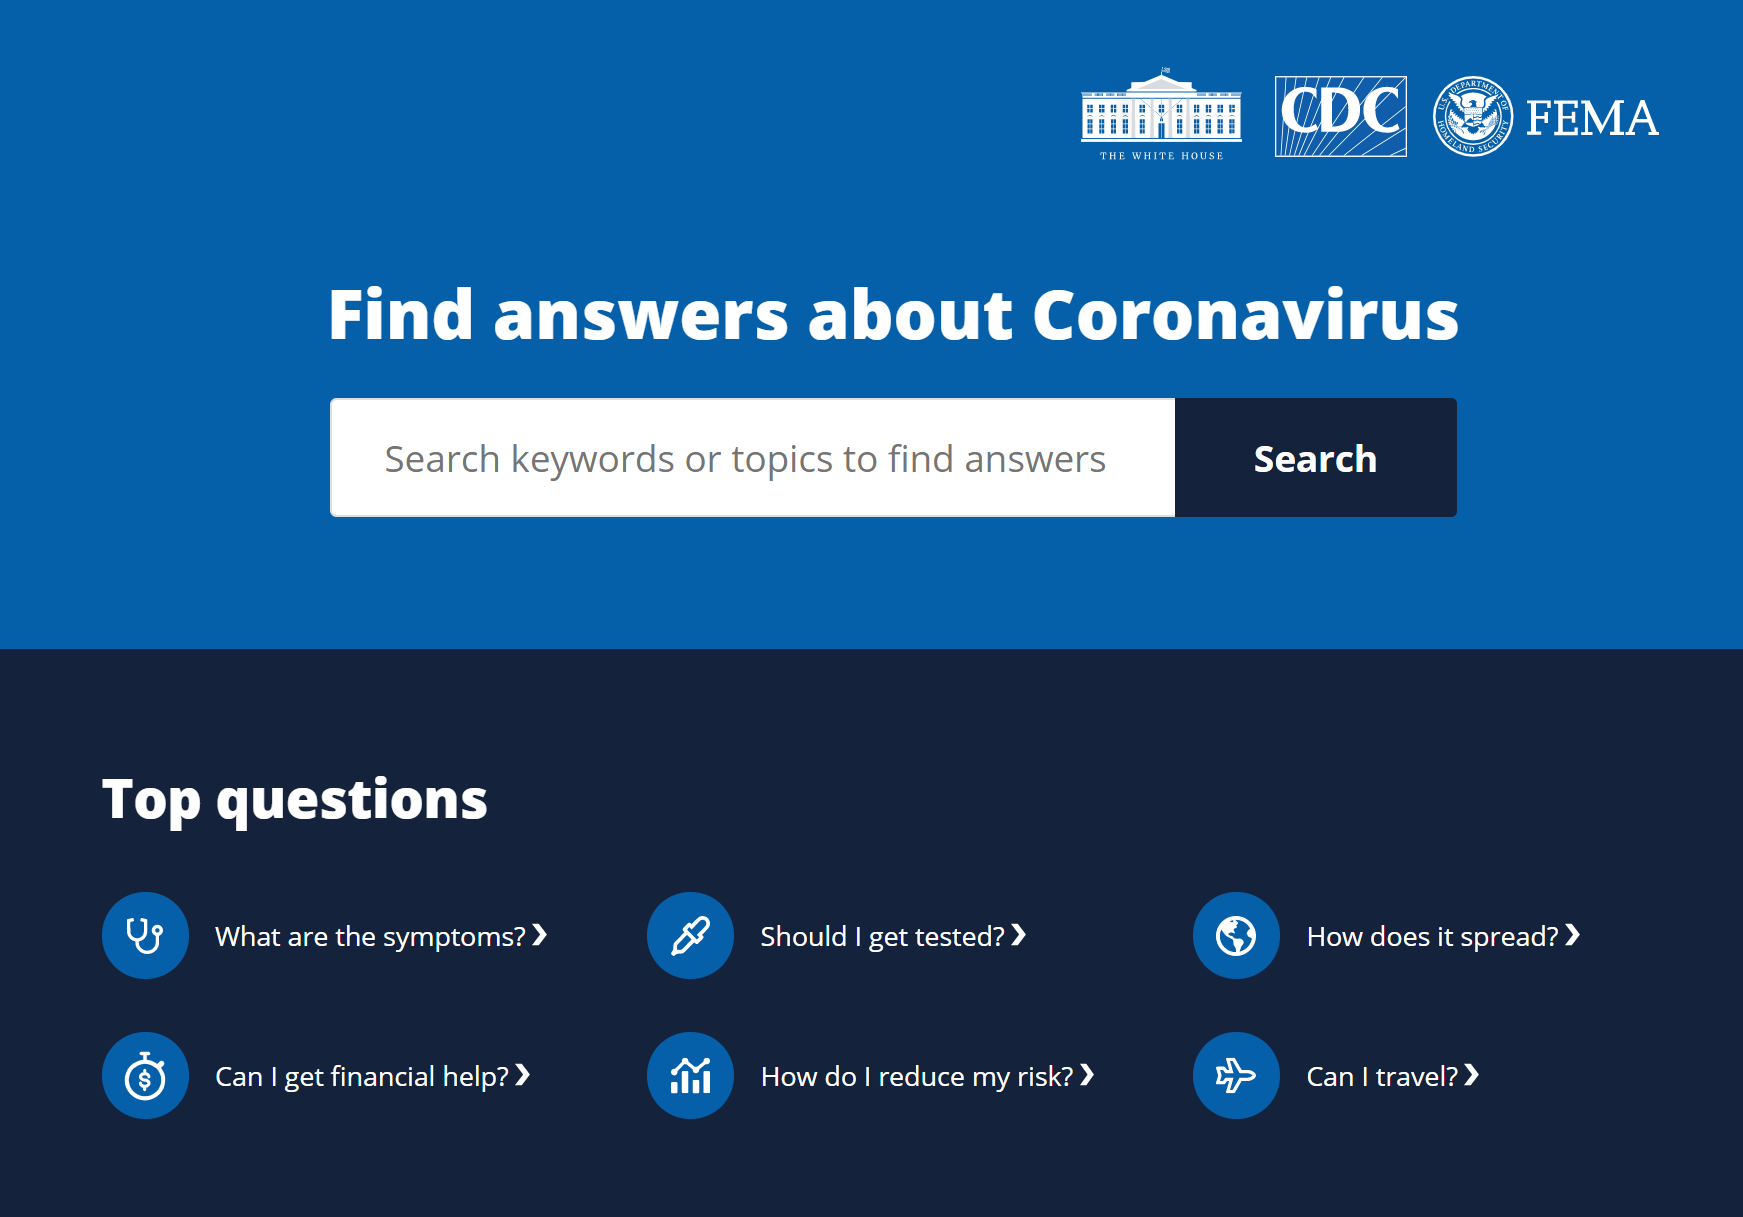 The federal coronavirus website not only lists the most frequently asked questions but also provides a search form to find answers to additional concerns that visitors may have.